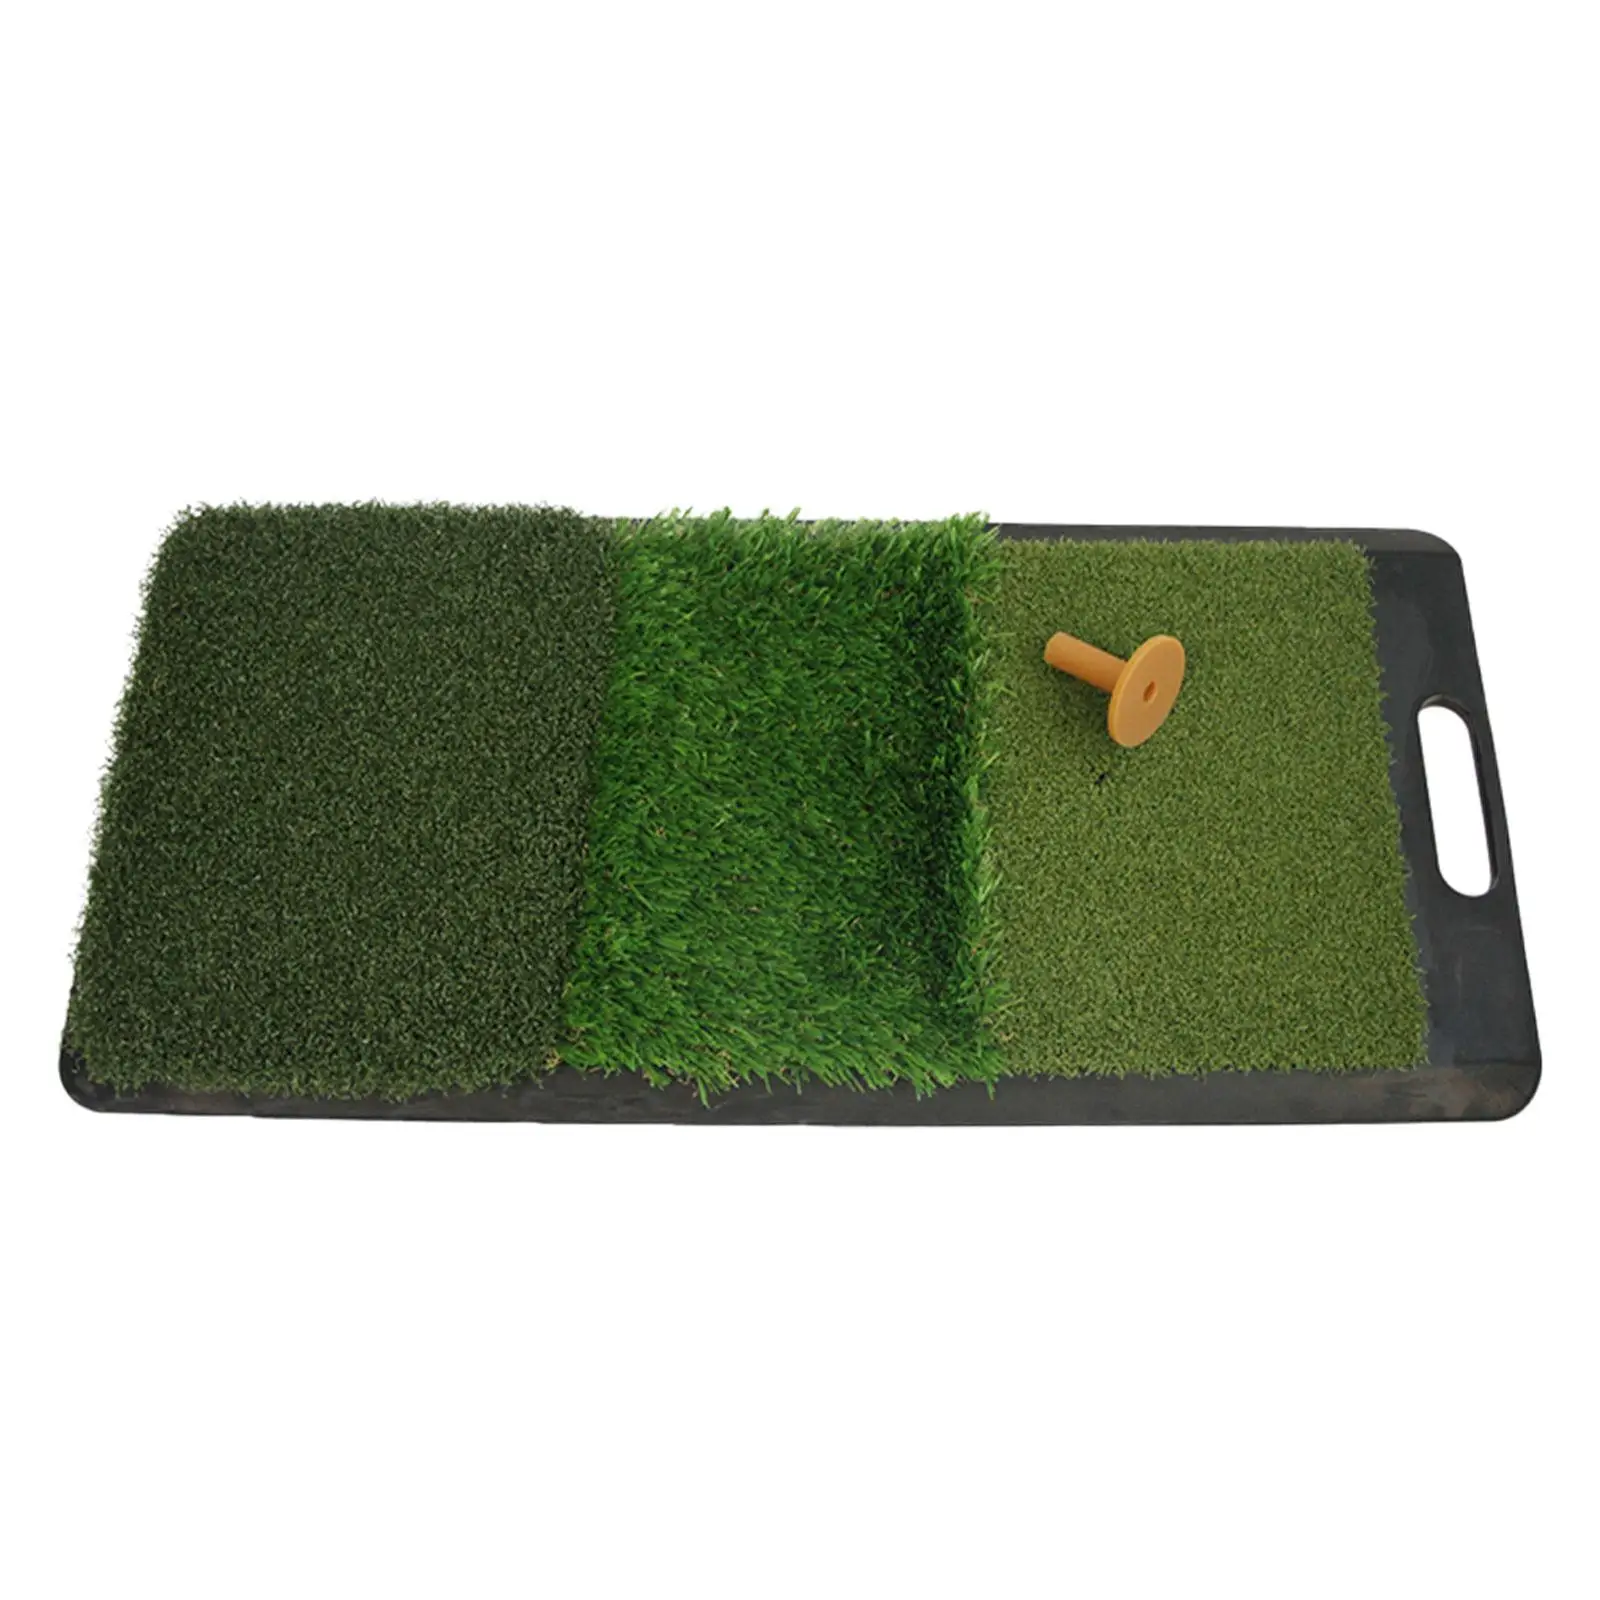 Golf Game Mat Indoor Outdoor Game Golf Hitting Mat Artificial Grass Golf Training Aid for Adults and Family for Backyard